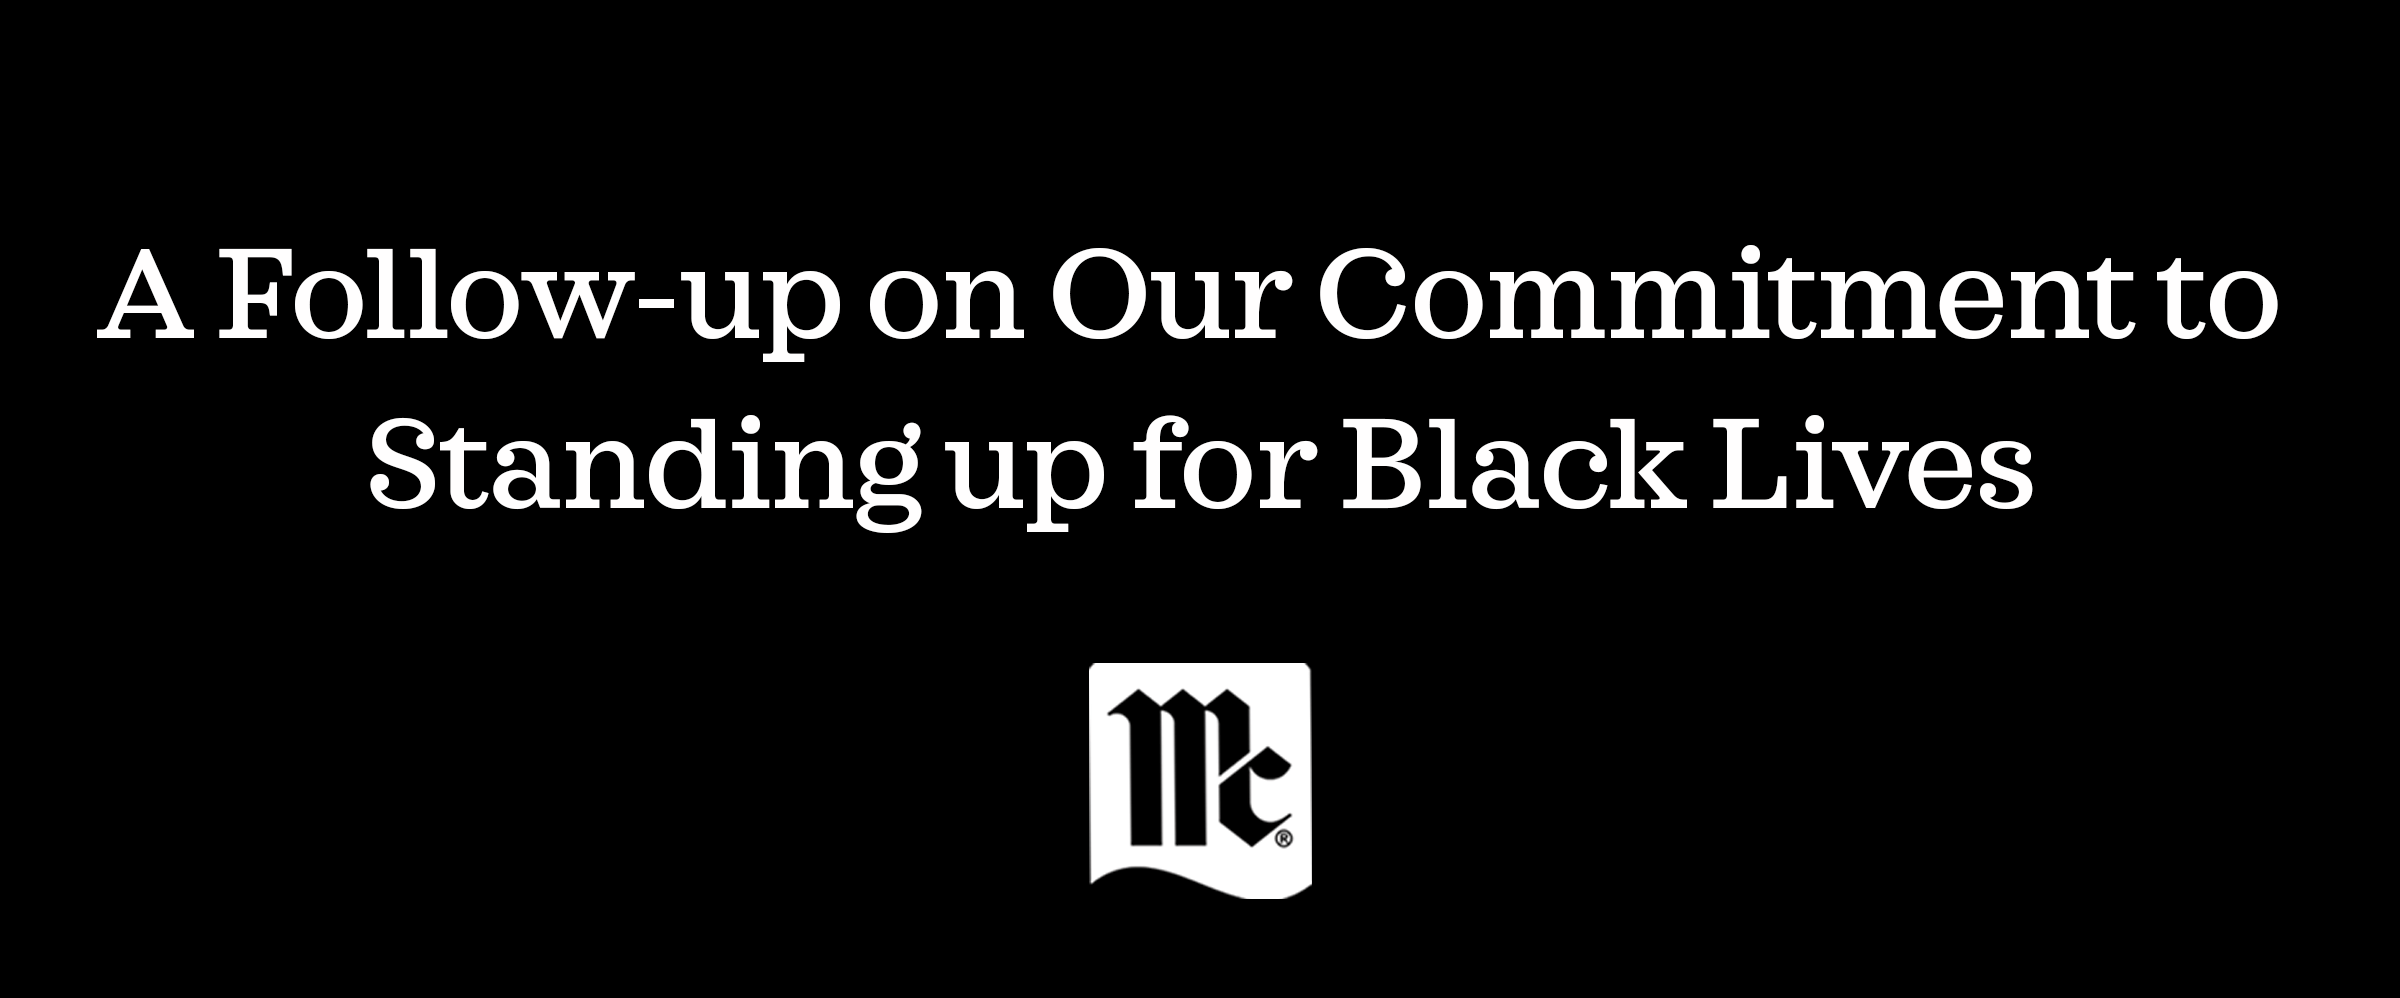 McCormick & Company Support for Black Lives; Diversity and Inclusion; D&I; corporate giving